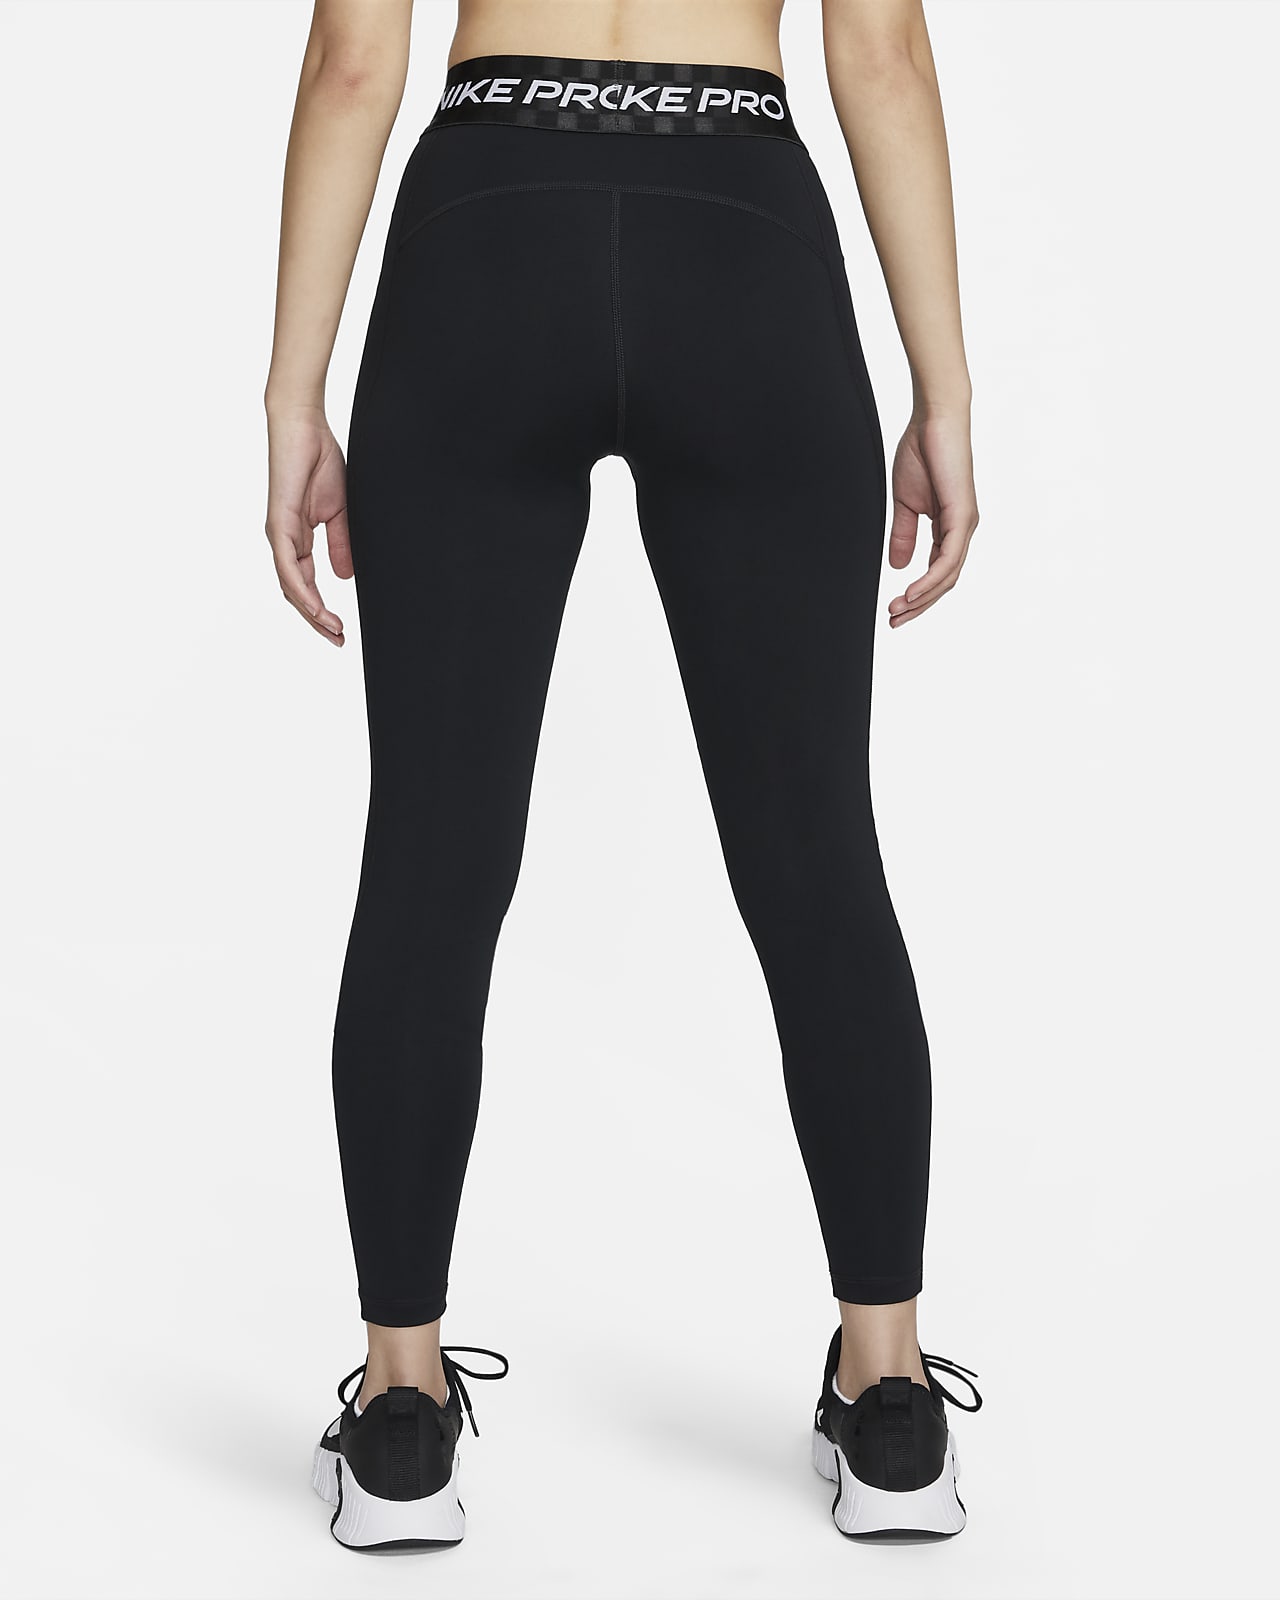 Nike Pro Dri-FIT Tights by Nike Online, THE ICONIC